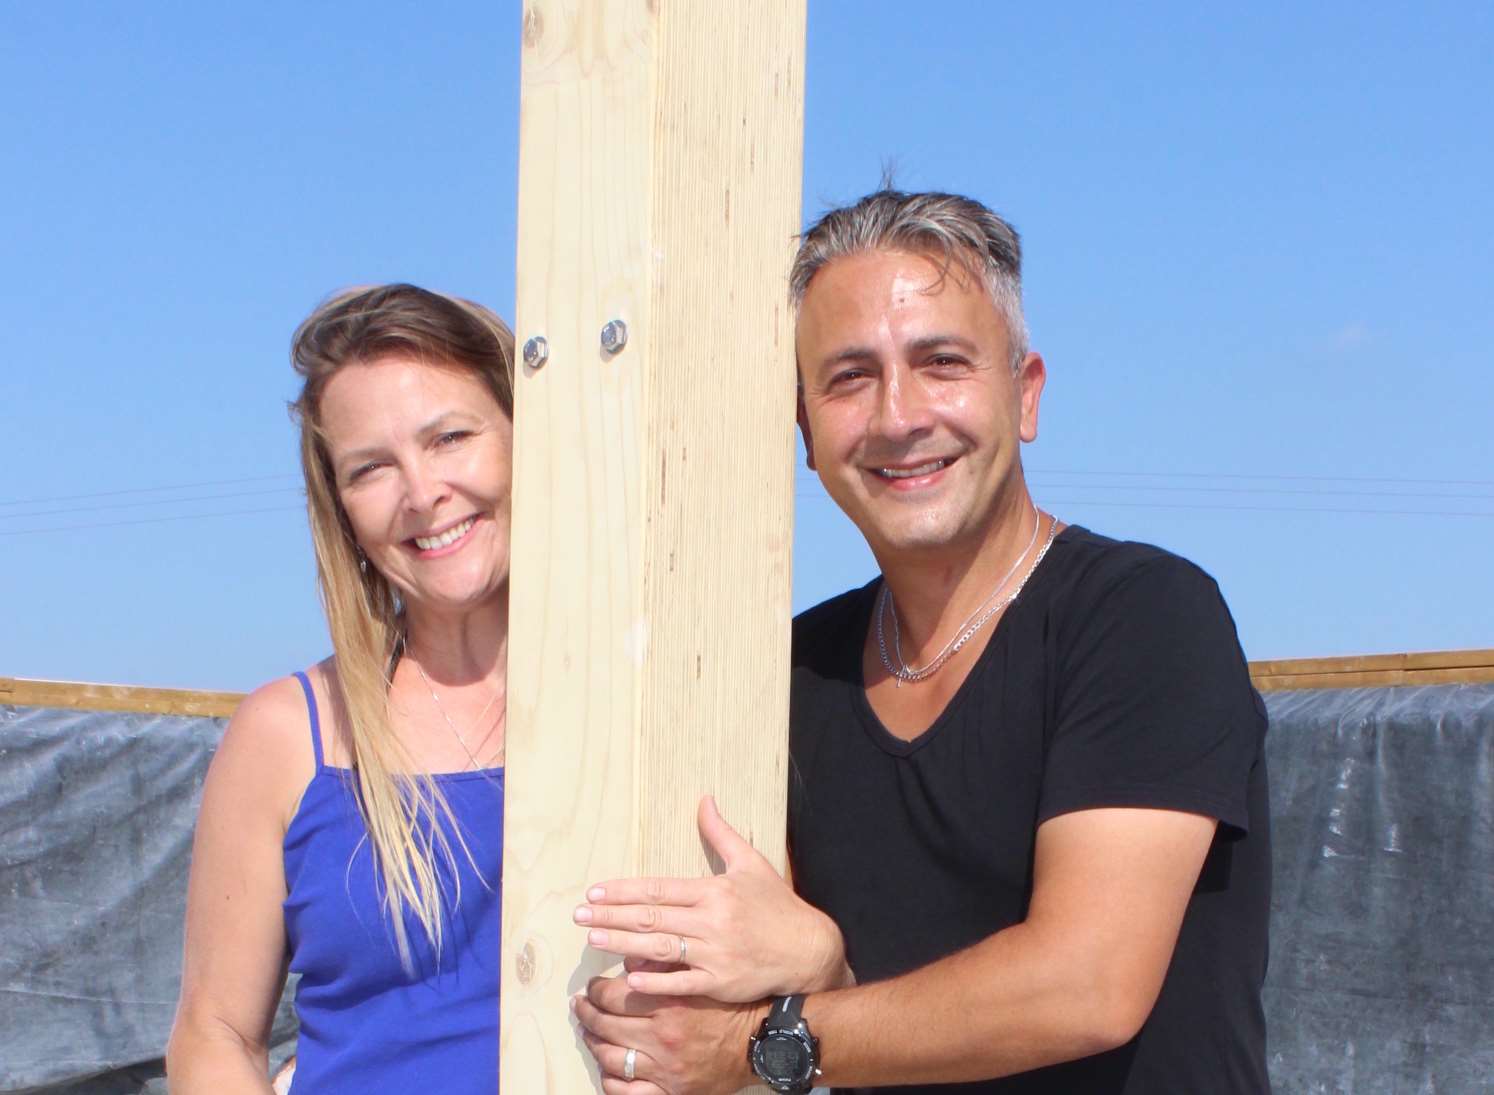 Heidi and Sav Pavlou work together to erect one of the first wooden timber posts